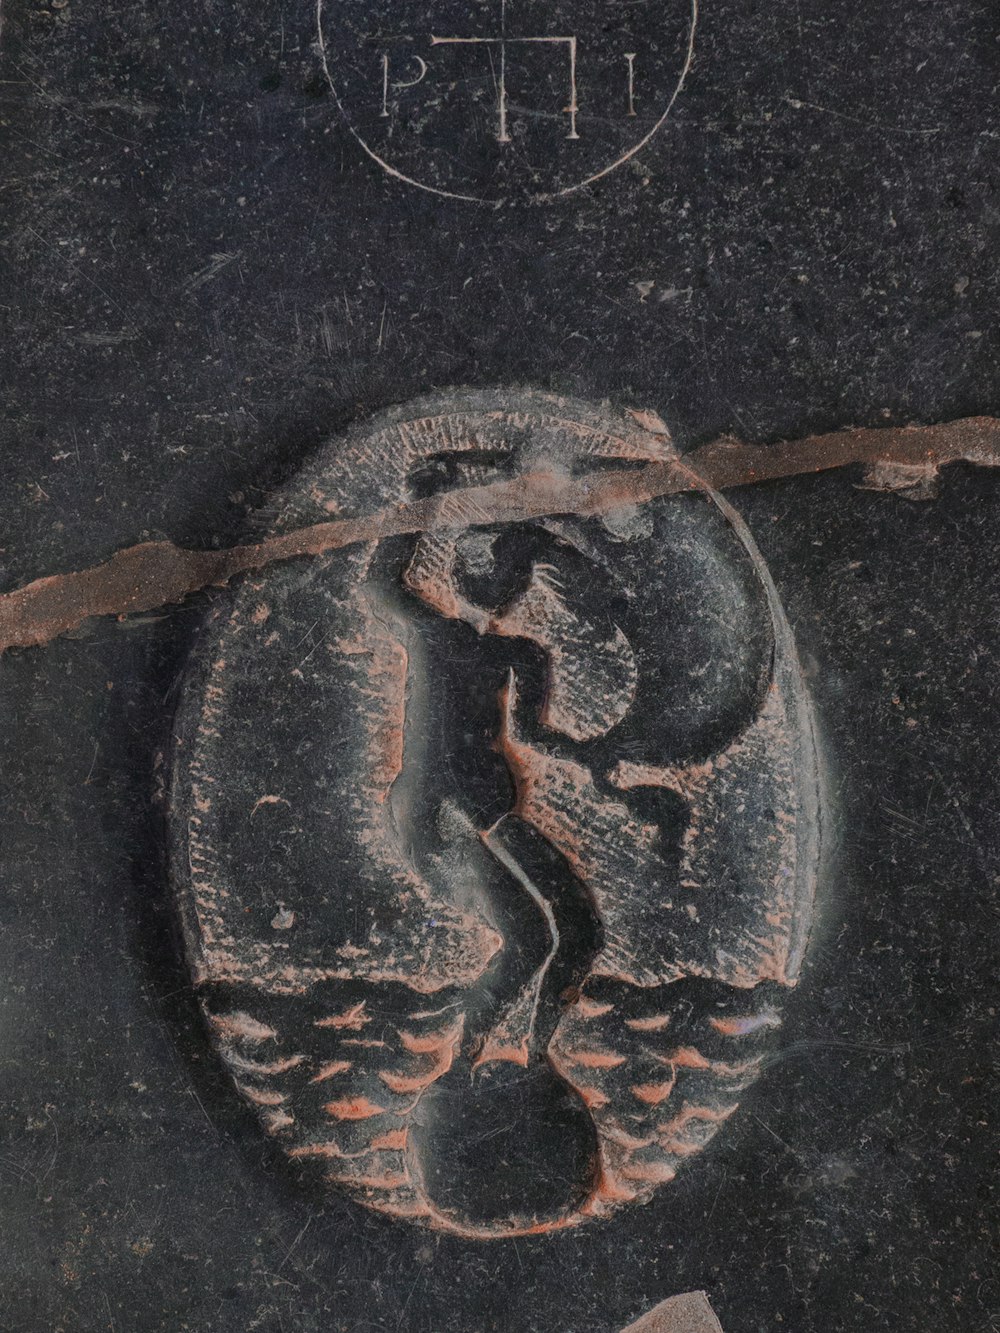 a close up of a rock with a drawing on it